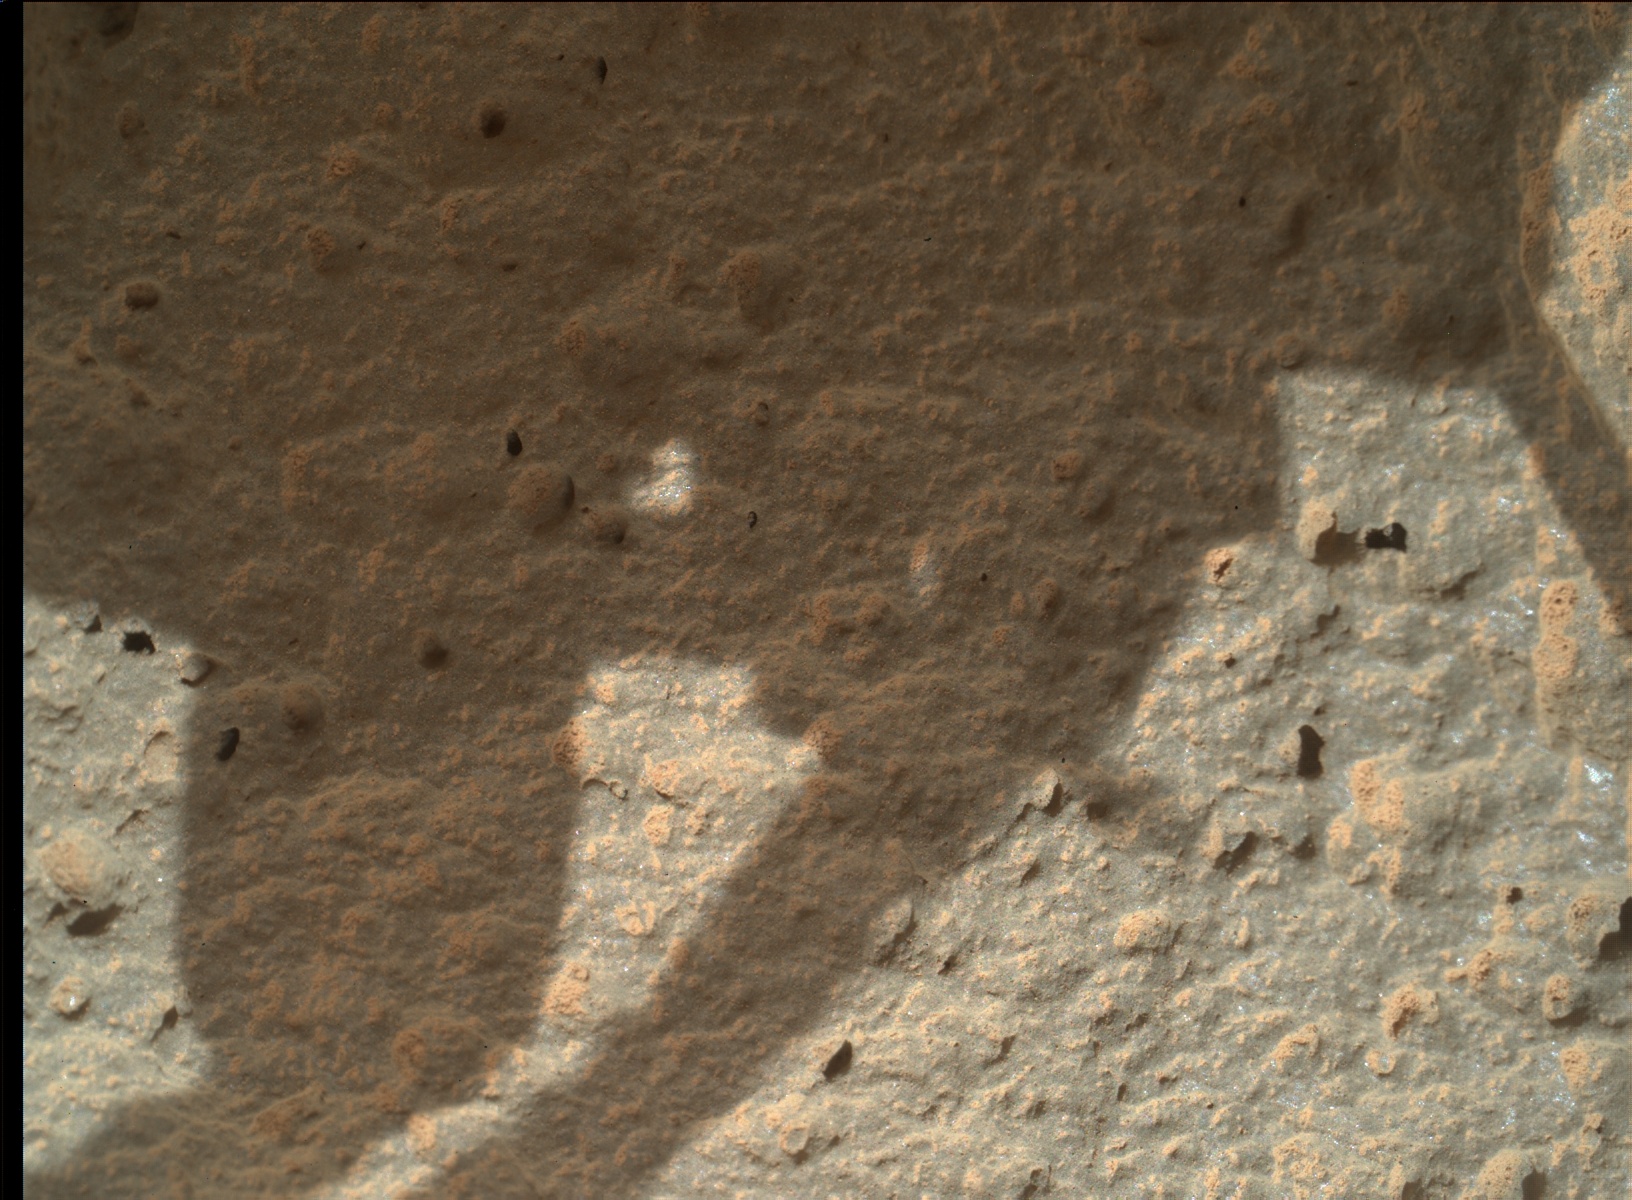 Nasa's Mars rover Curiosity acquired this image using its Mars Hand Lens Imager (MAHLI) on Sol 694